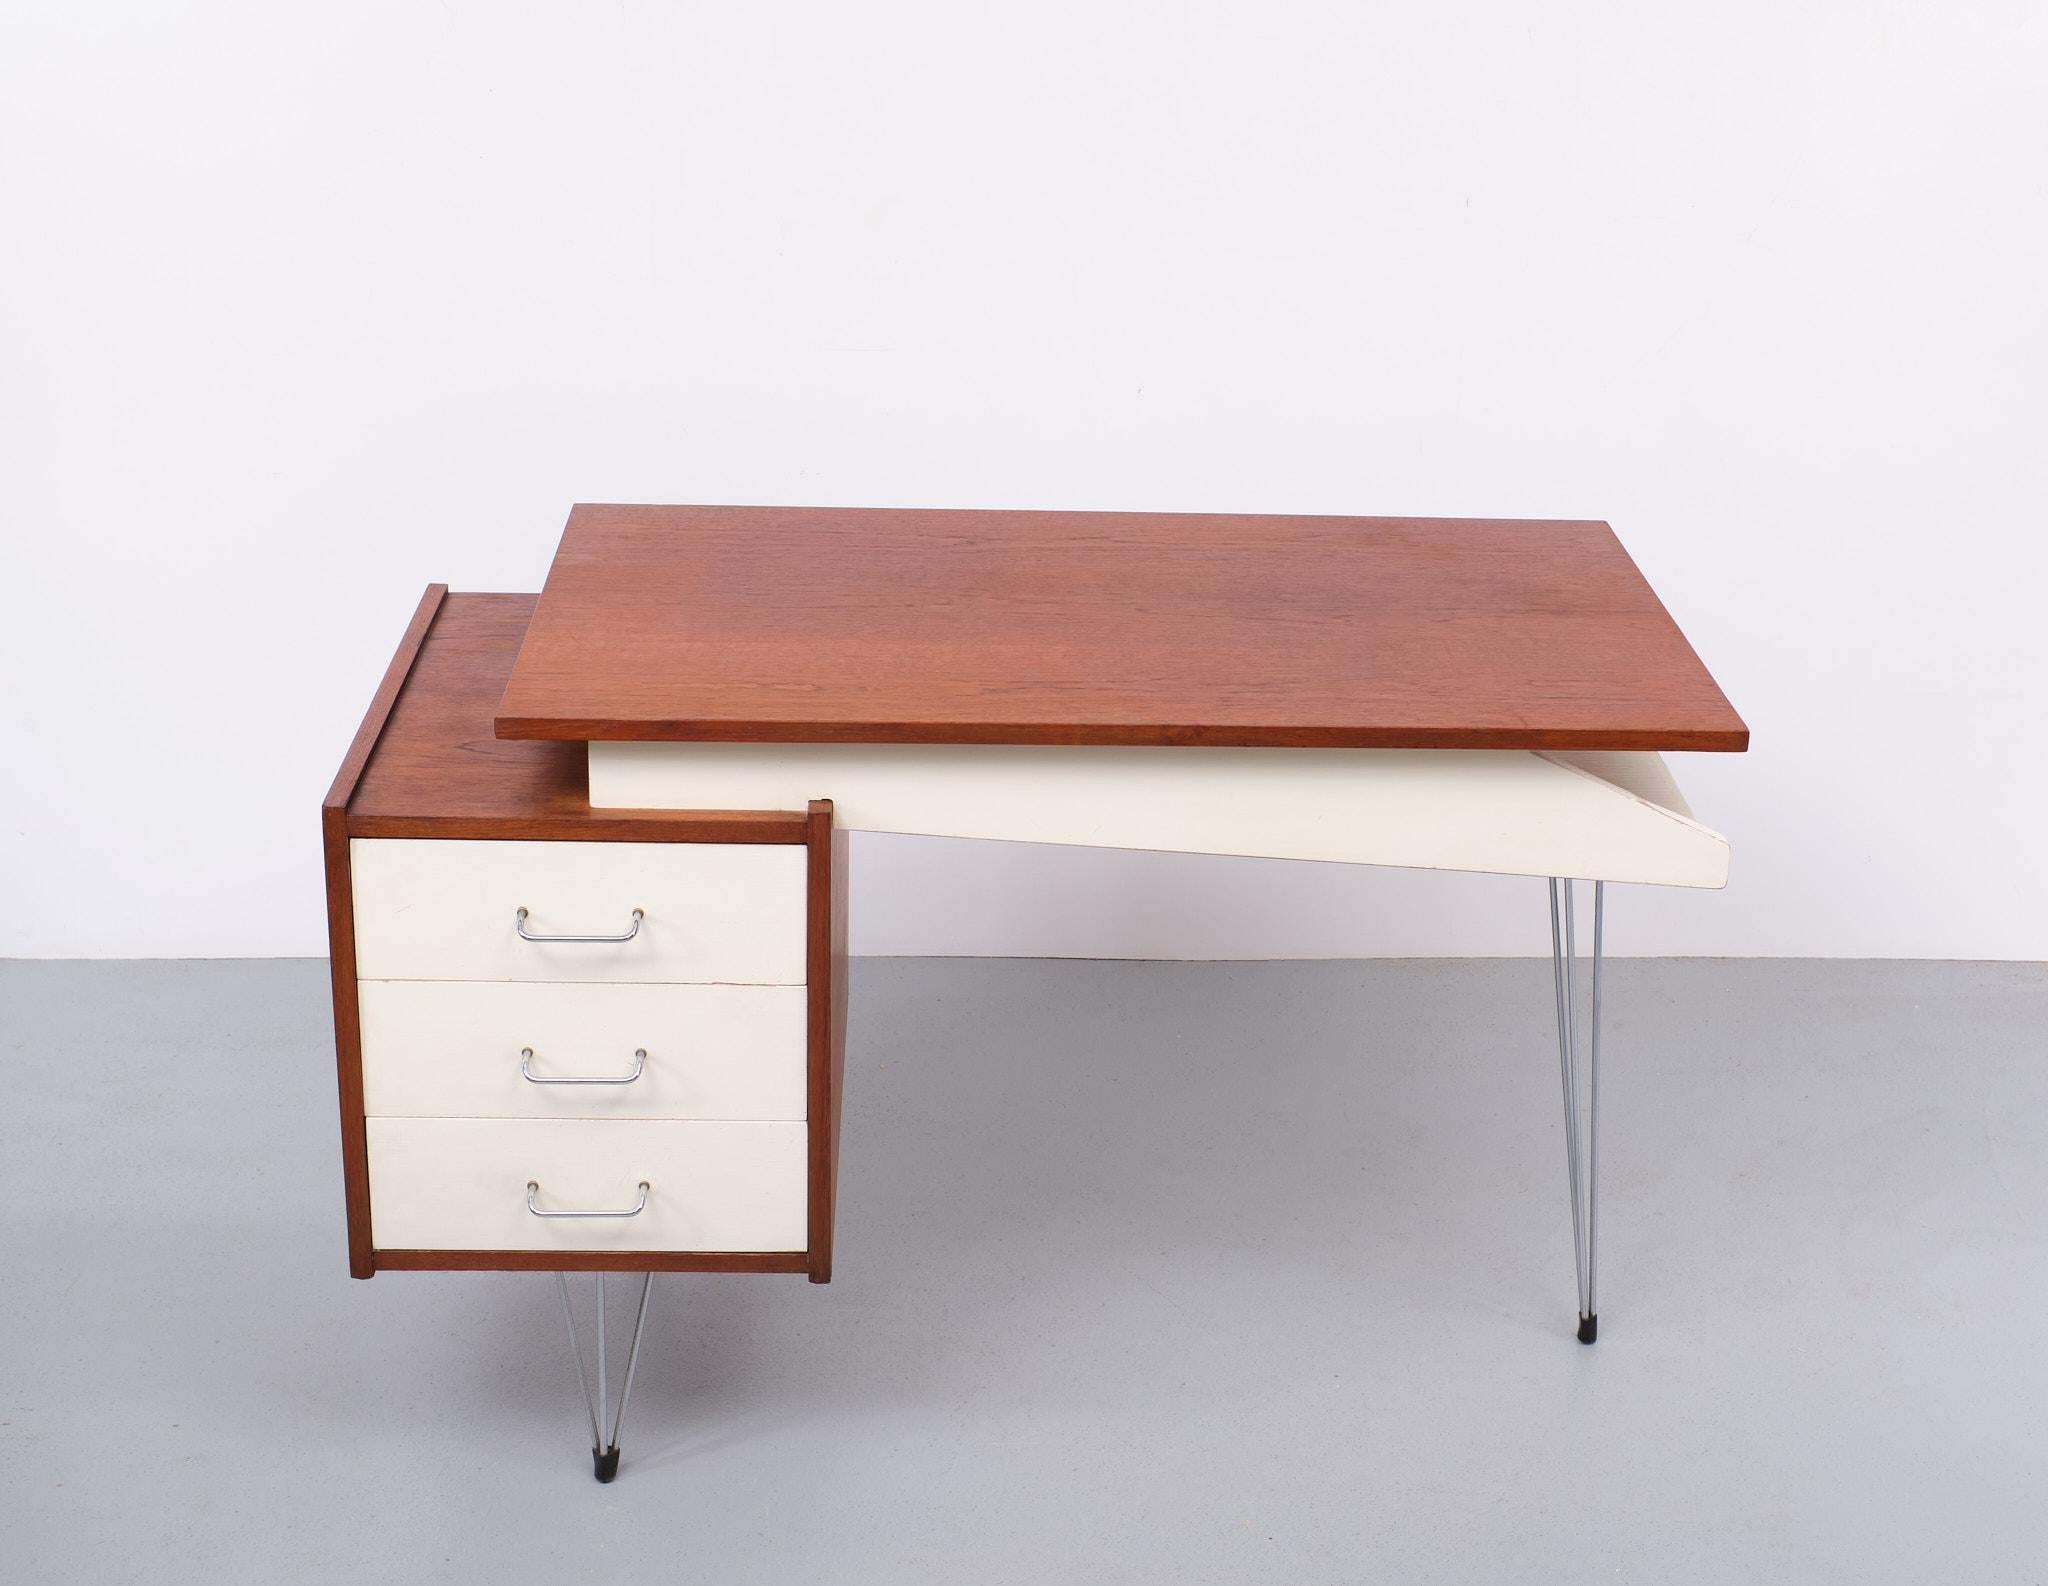 Dutch glory! This rare & beautiful vintage Dutch design desk from Pastoe is a real must-have for design enthusiasts. A design by Cees Braakman. Period: 1950s/60s. Known for its special Chrome metal tension legs and its optically floating top. A nice